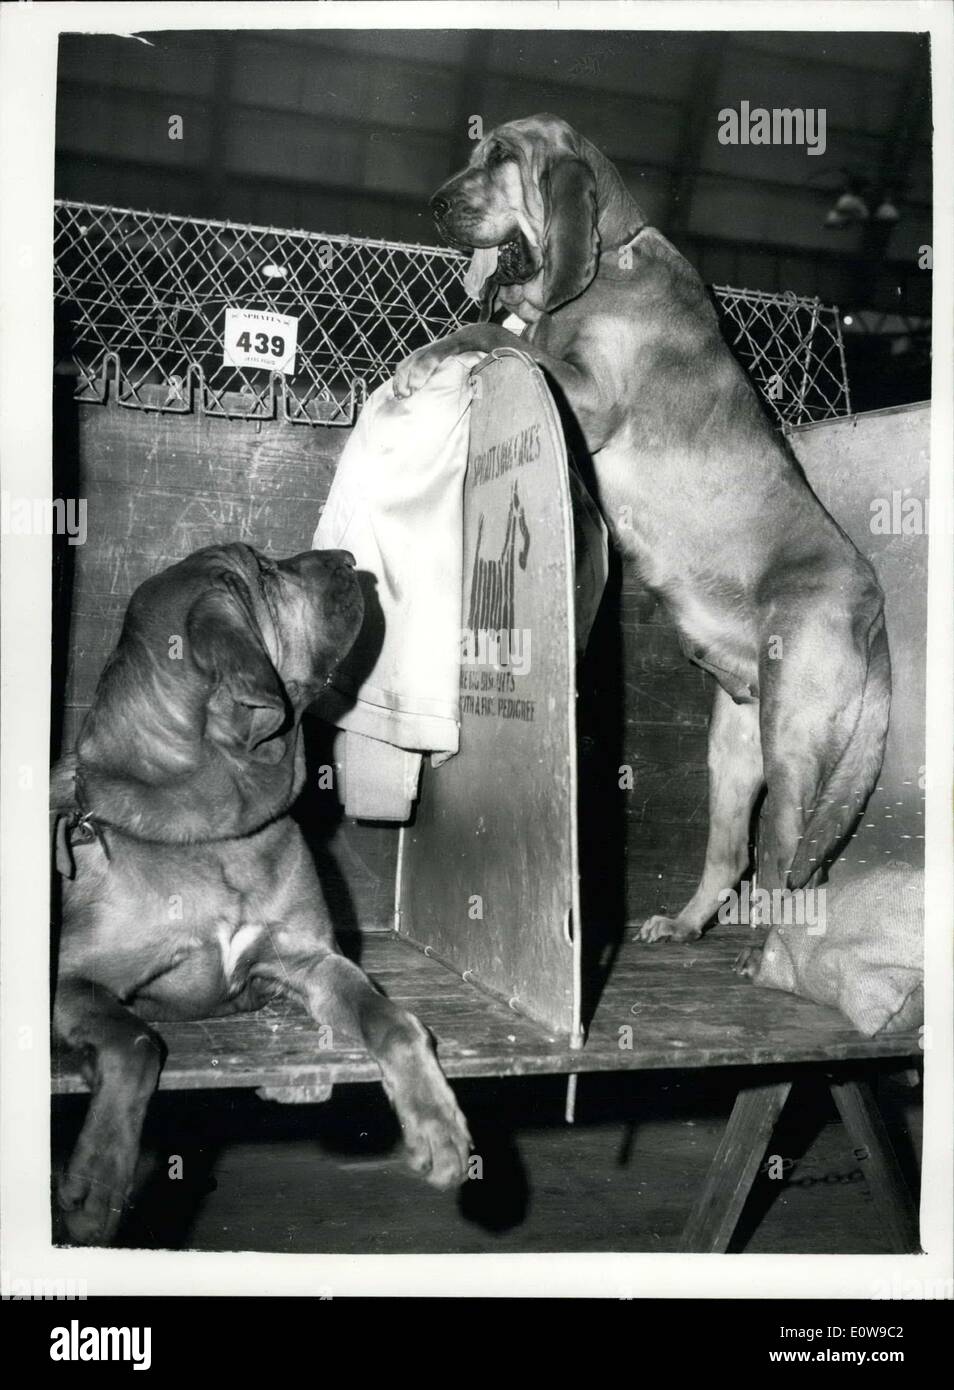 Feb. 09, 1962 - Cruft's Dog Show Opens Today: Cruft's Dog Show- claimed to be the biggest in the World - opened this morning at Stock Photo